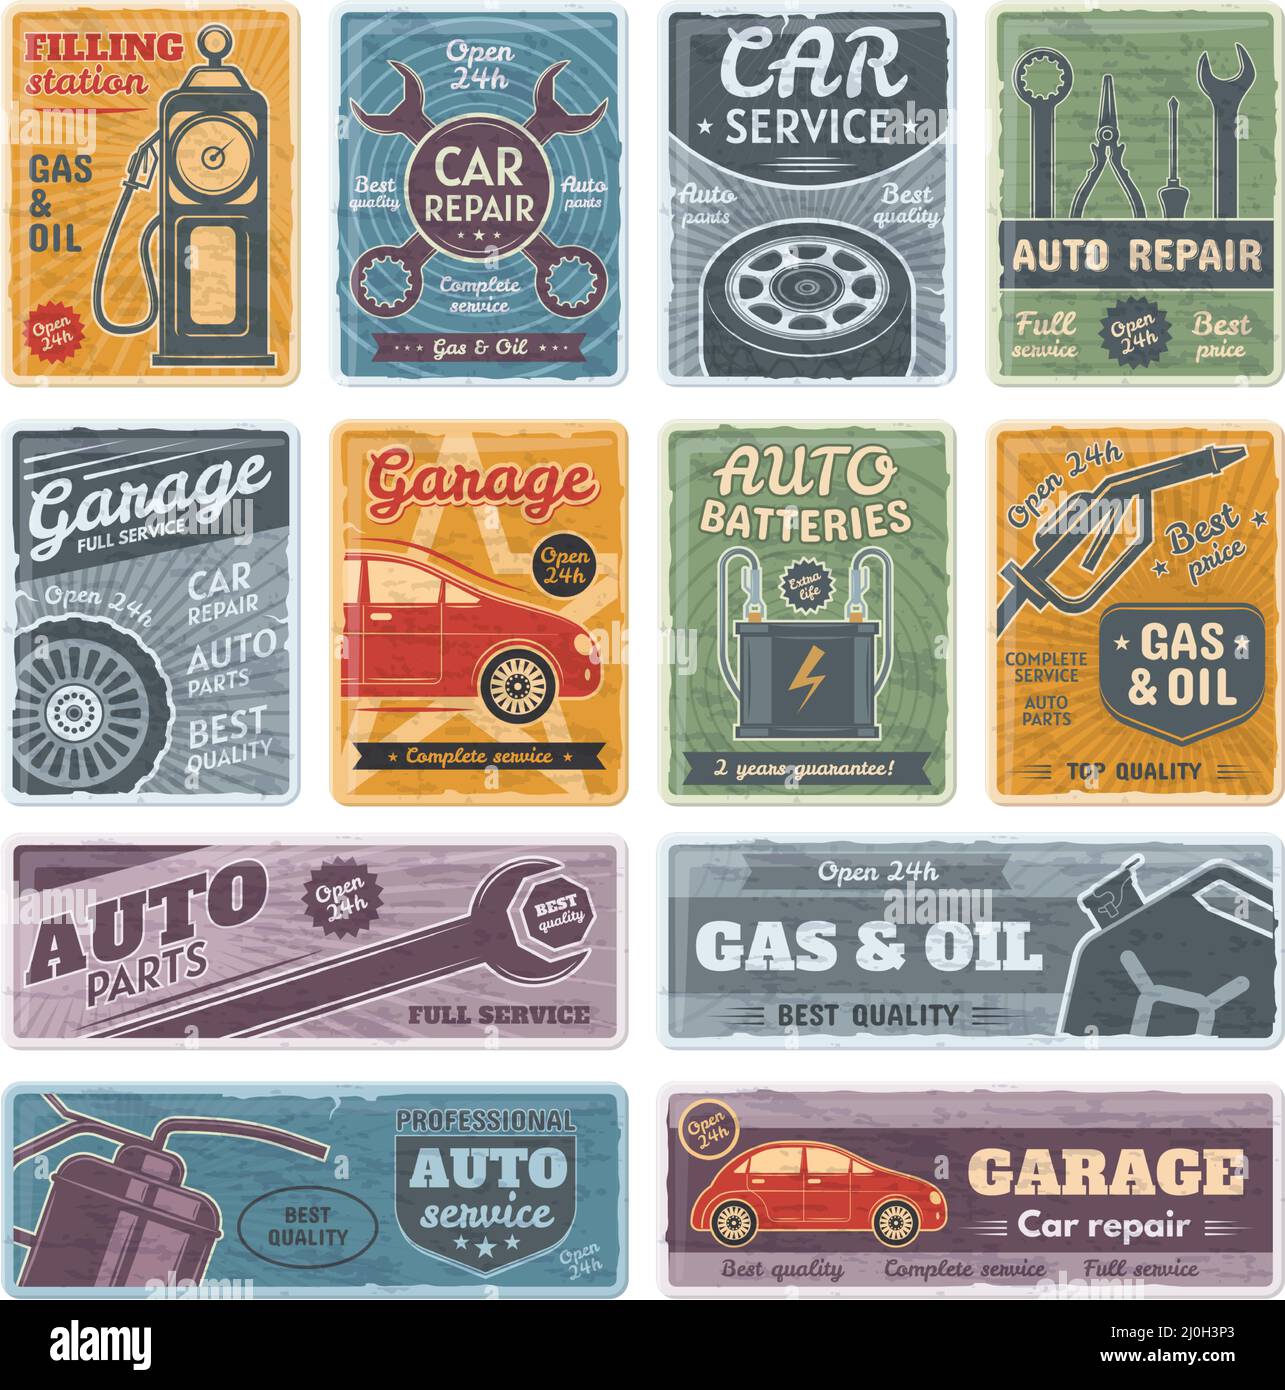 Retro car metal signs, garage, fuel, auto service posters. Gasoline station and repair service signs vector illustration set. Rusty old plates Stock Vector